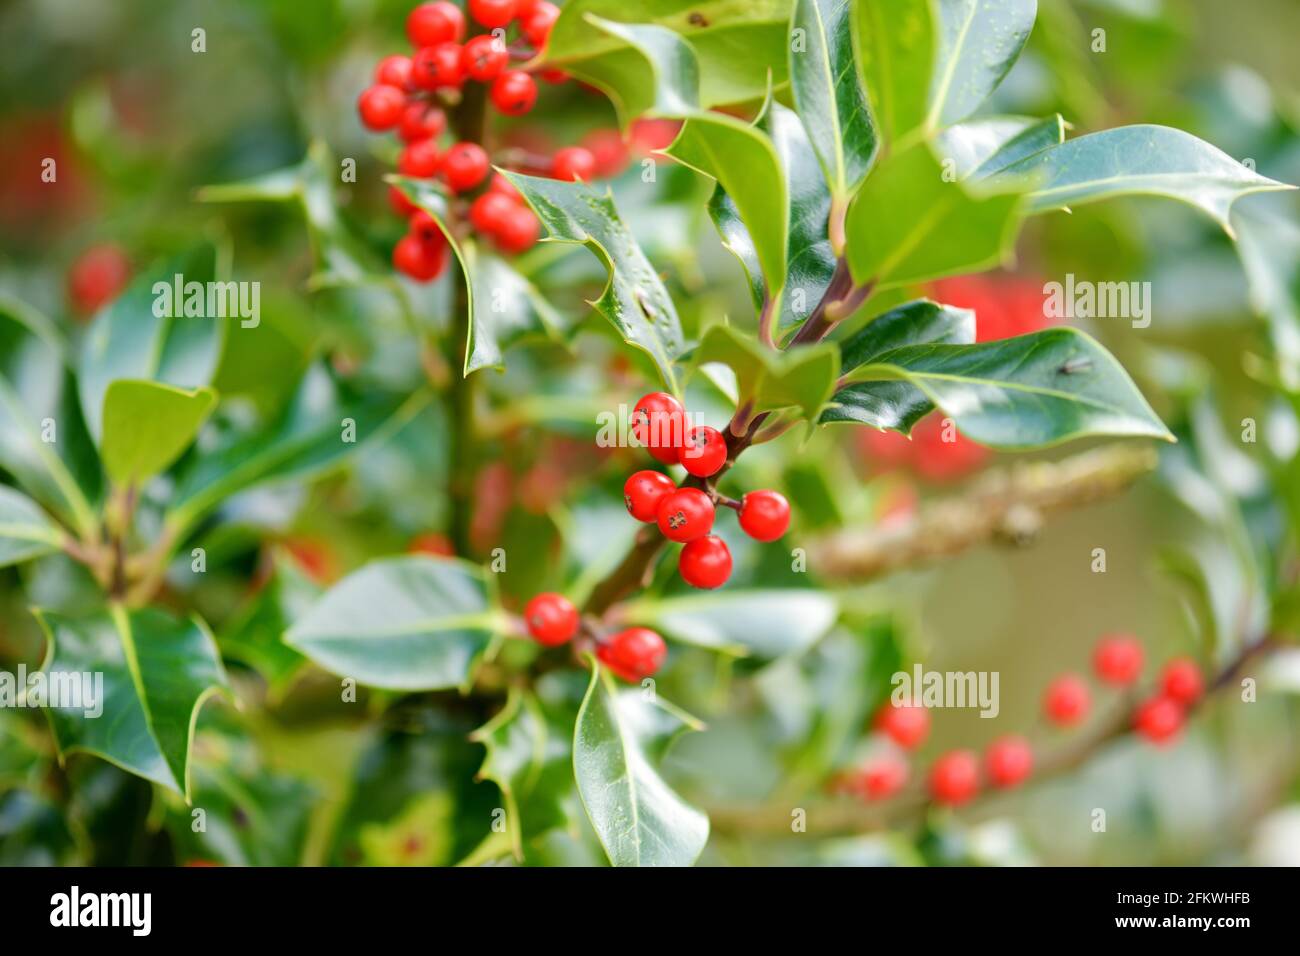 Red berries and thorny green leaves of a holly plant Stock Photo